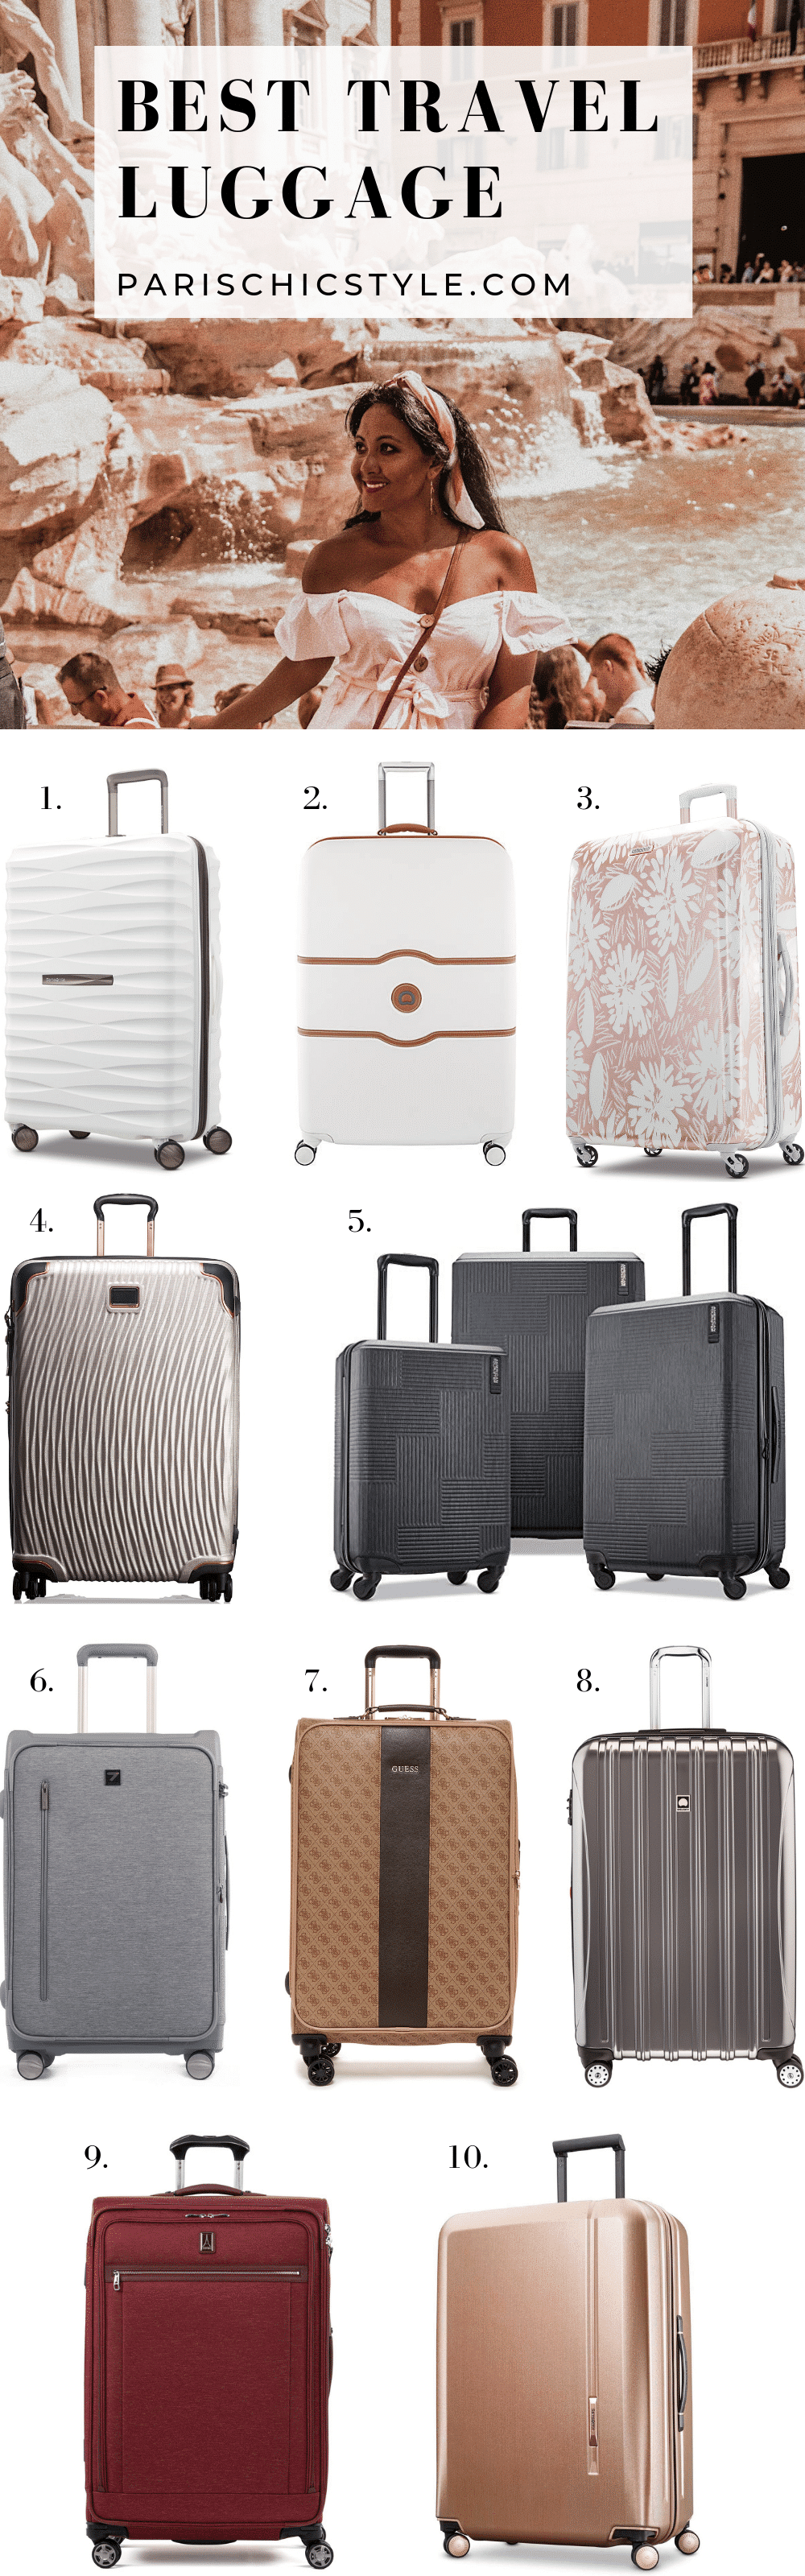 best-travel-luggage-checked-lightweight-suitcases-hardcase-softshell-spinner-wheels-paris-chic-style-pinterest (1)